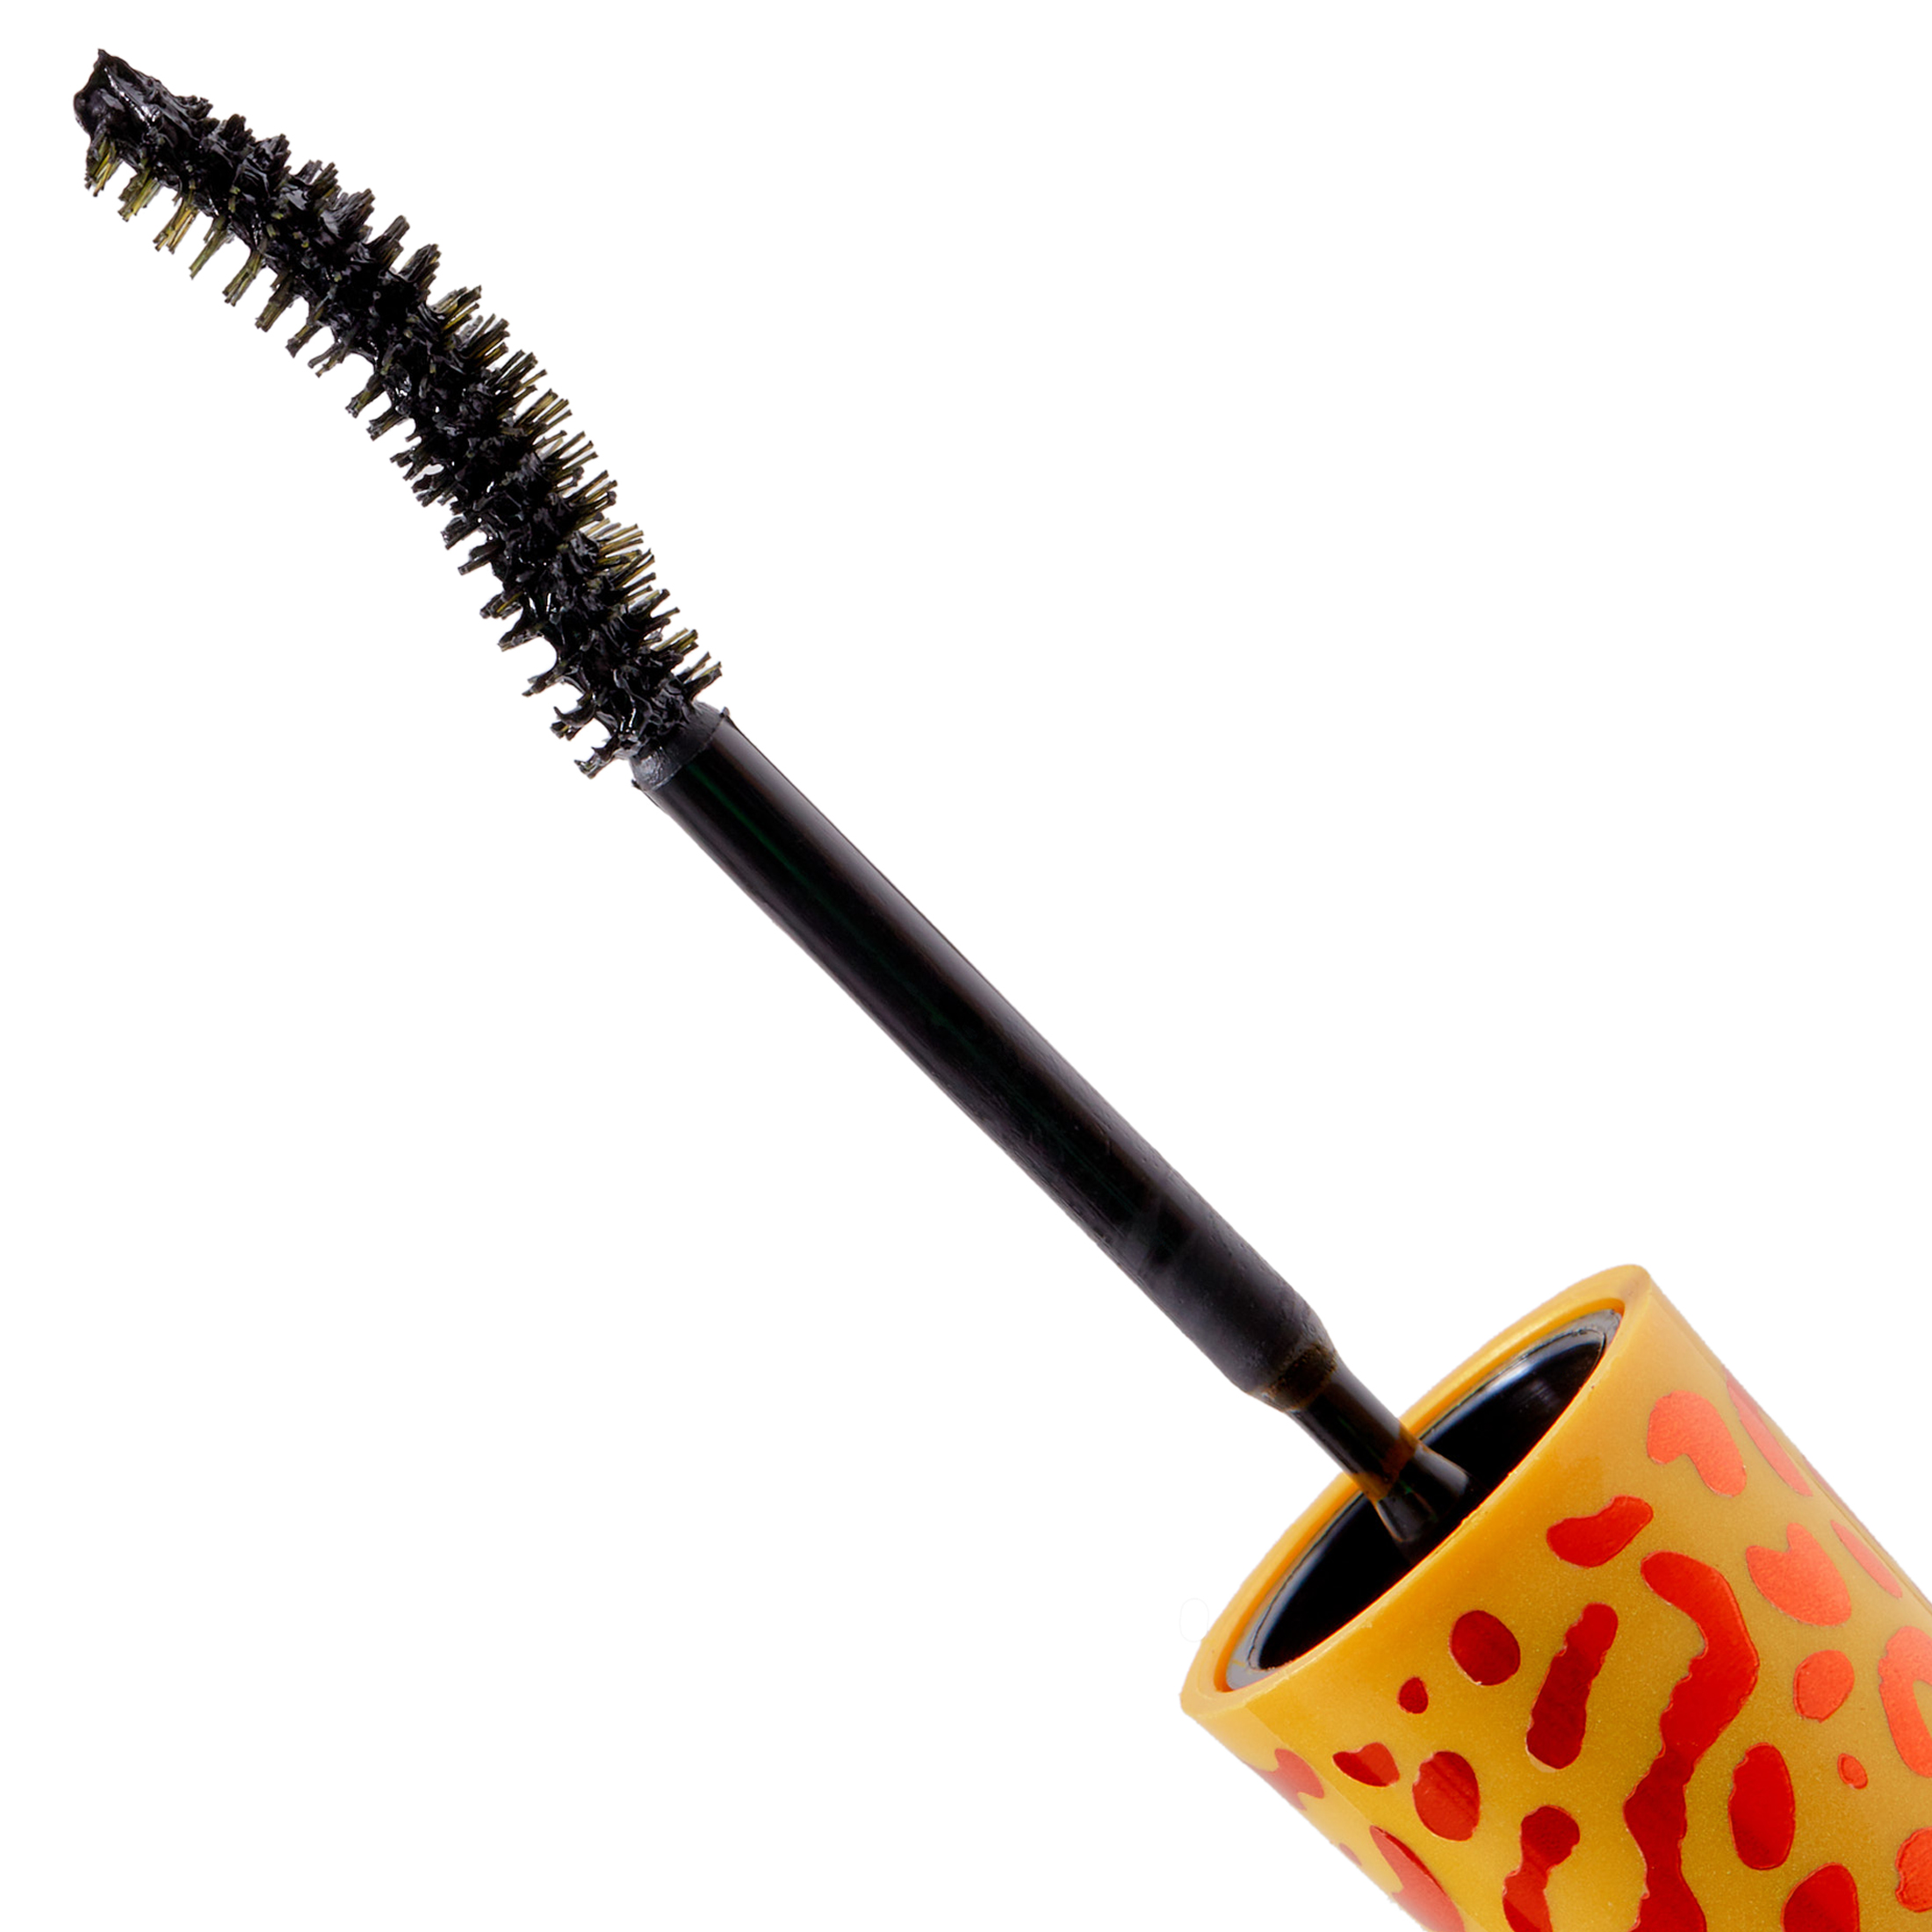 Maybelline Volum Express The Colossal Cat Eyes Waterproof Mascara, Glam Black - image 5 of 8